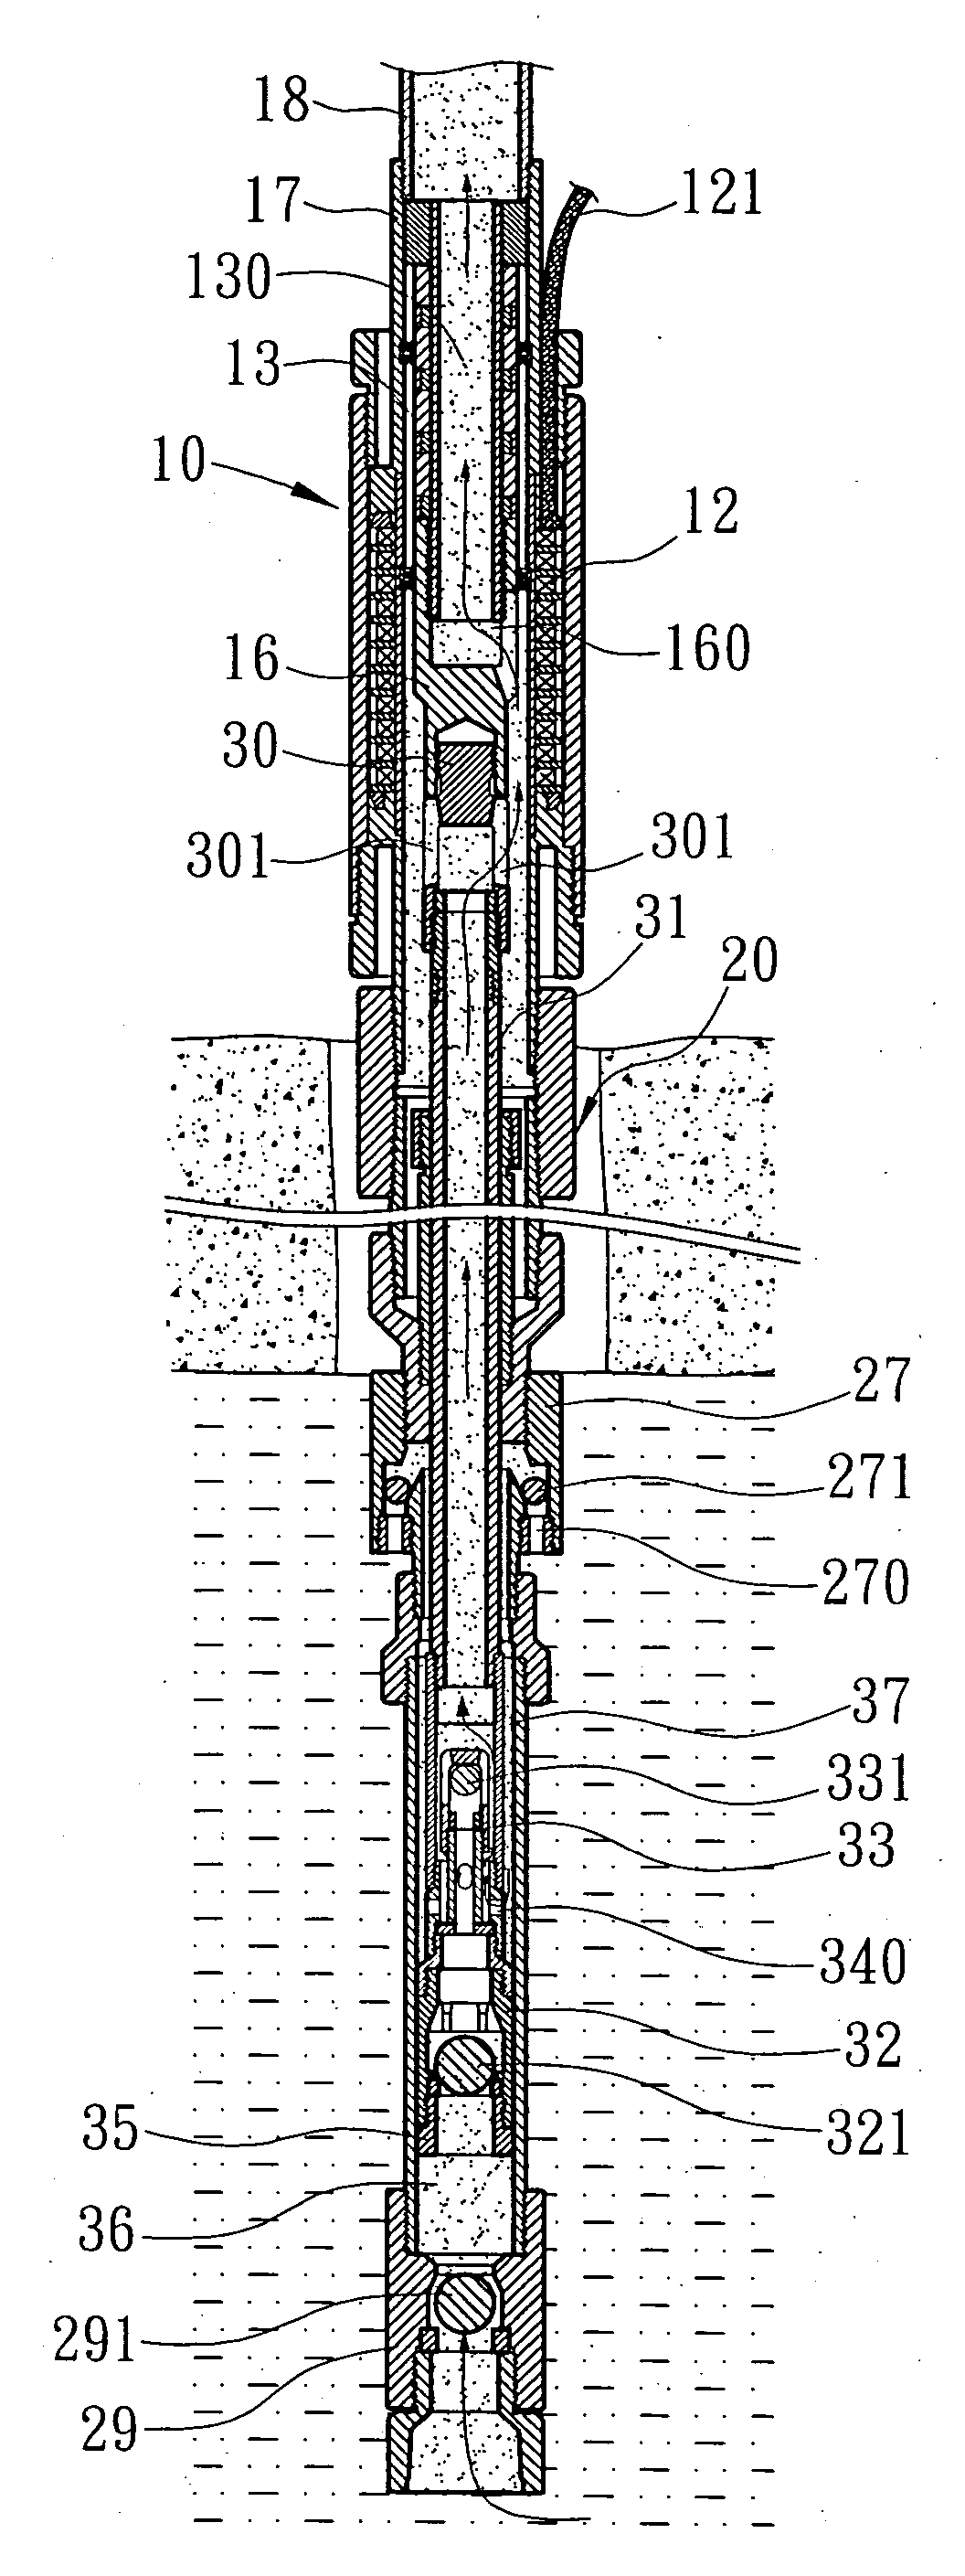 Oil pumping unit using an electrical submersible pump driven by a circular linear synchronous three-phase motor with rare earth permananet magnet